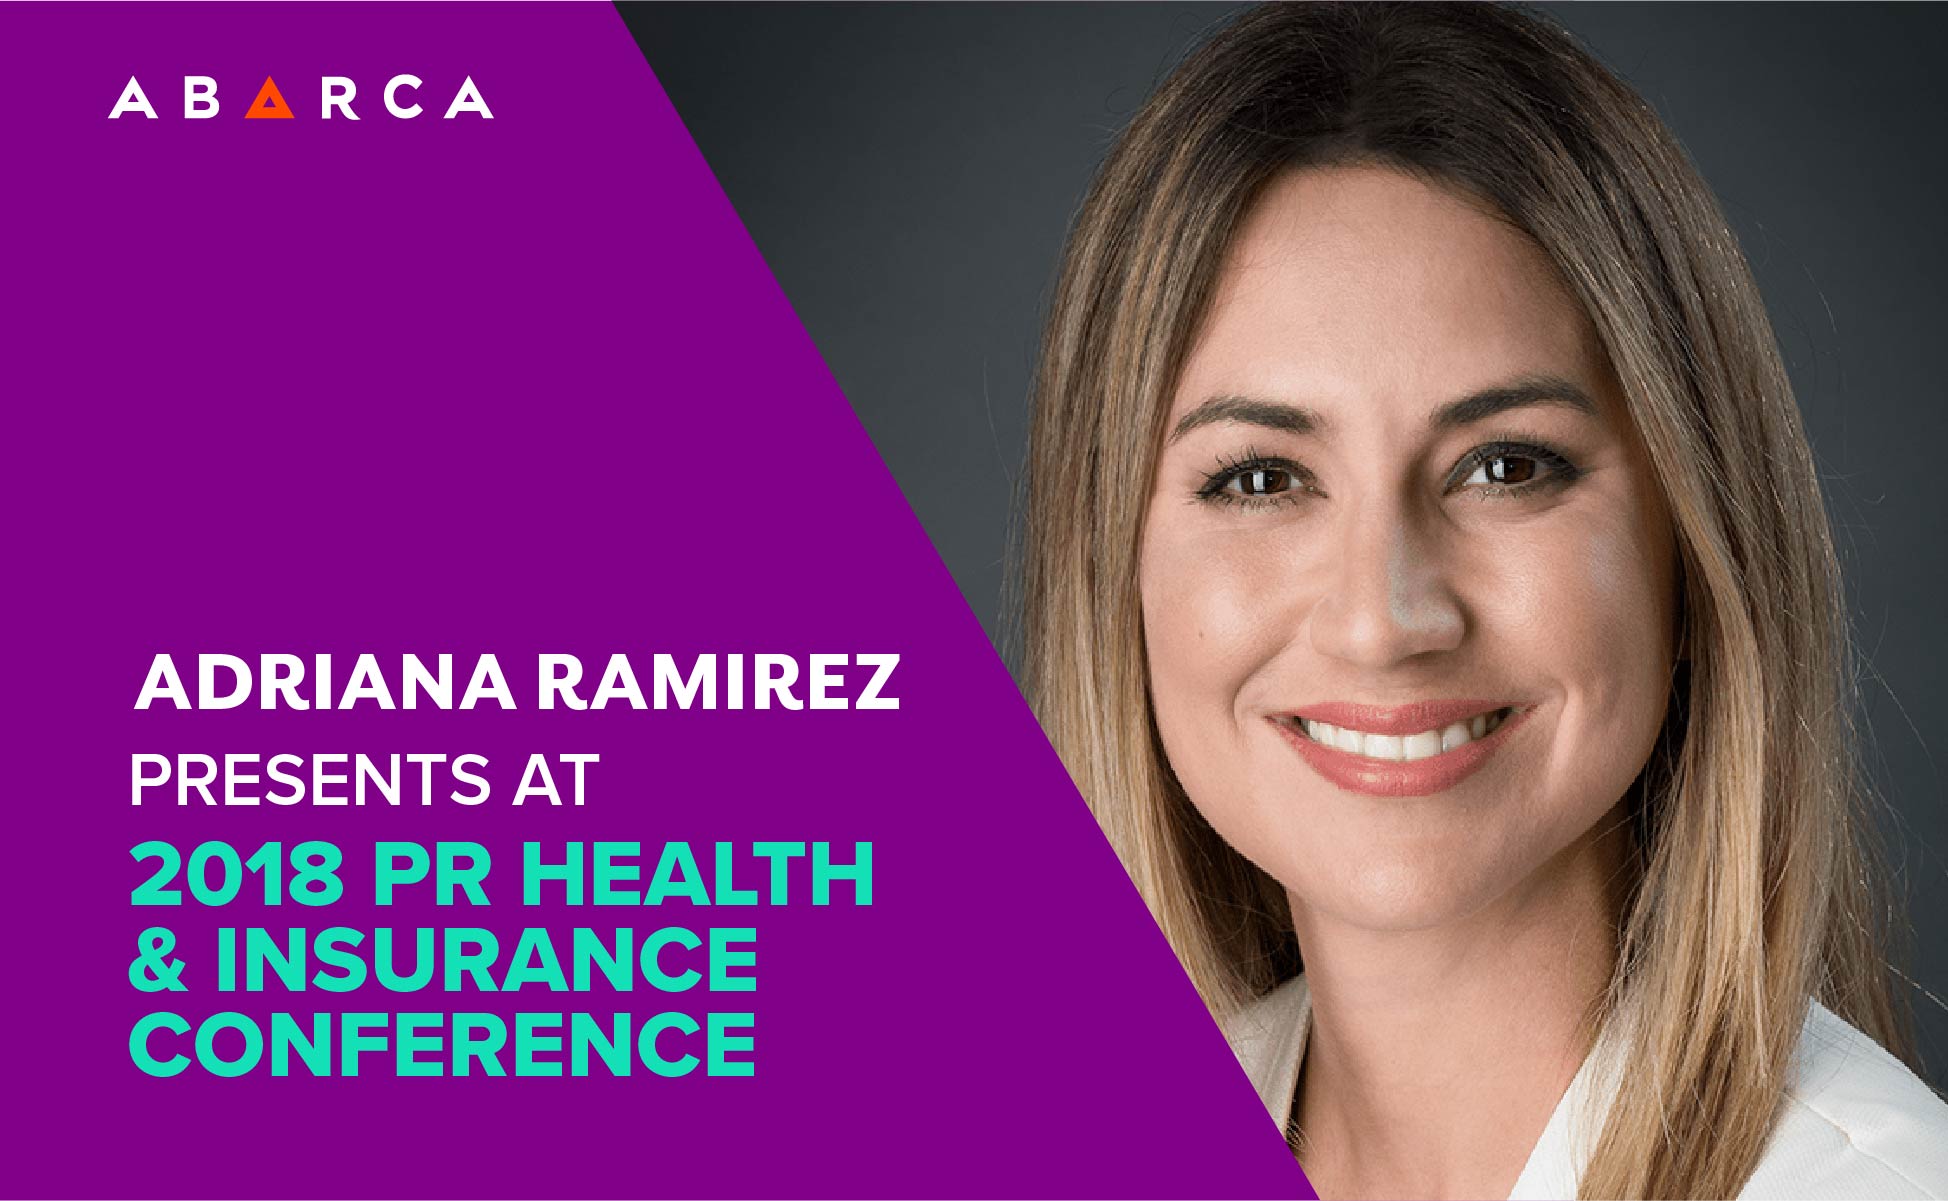 Abarca’s Chief Legal Officer, Adriana Ramirez, speaks at the 2018 PR Health & Insurance Conference